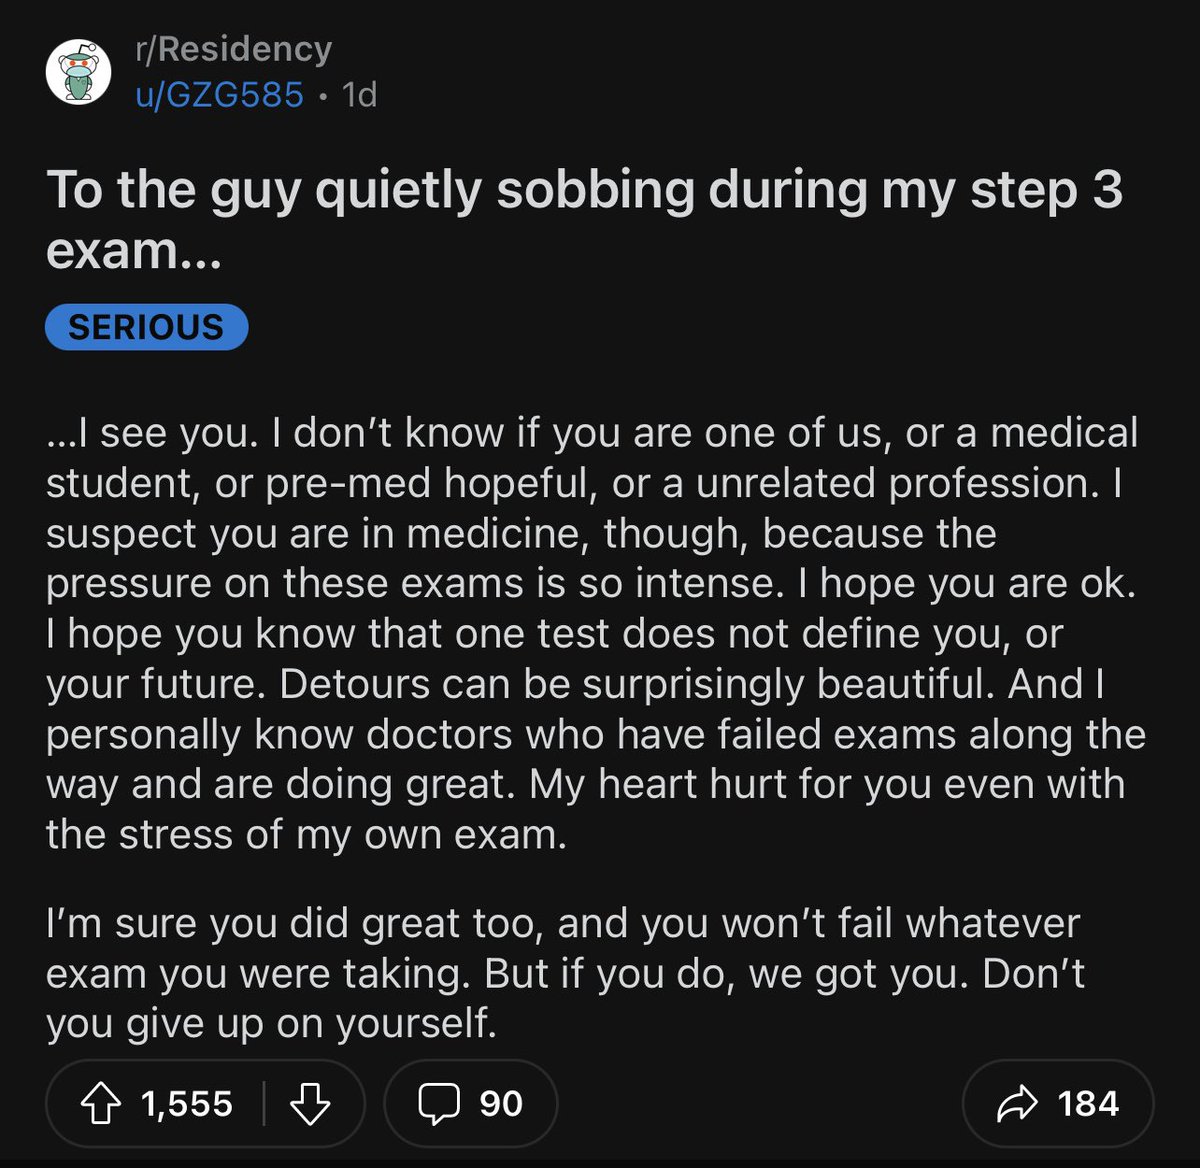 Hoping the test taker somehow sees this post from r/Residency